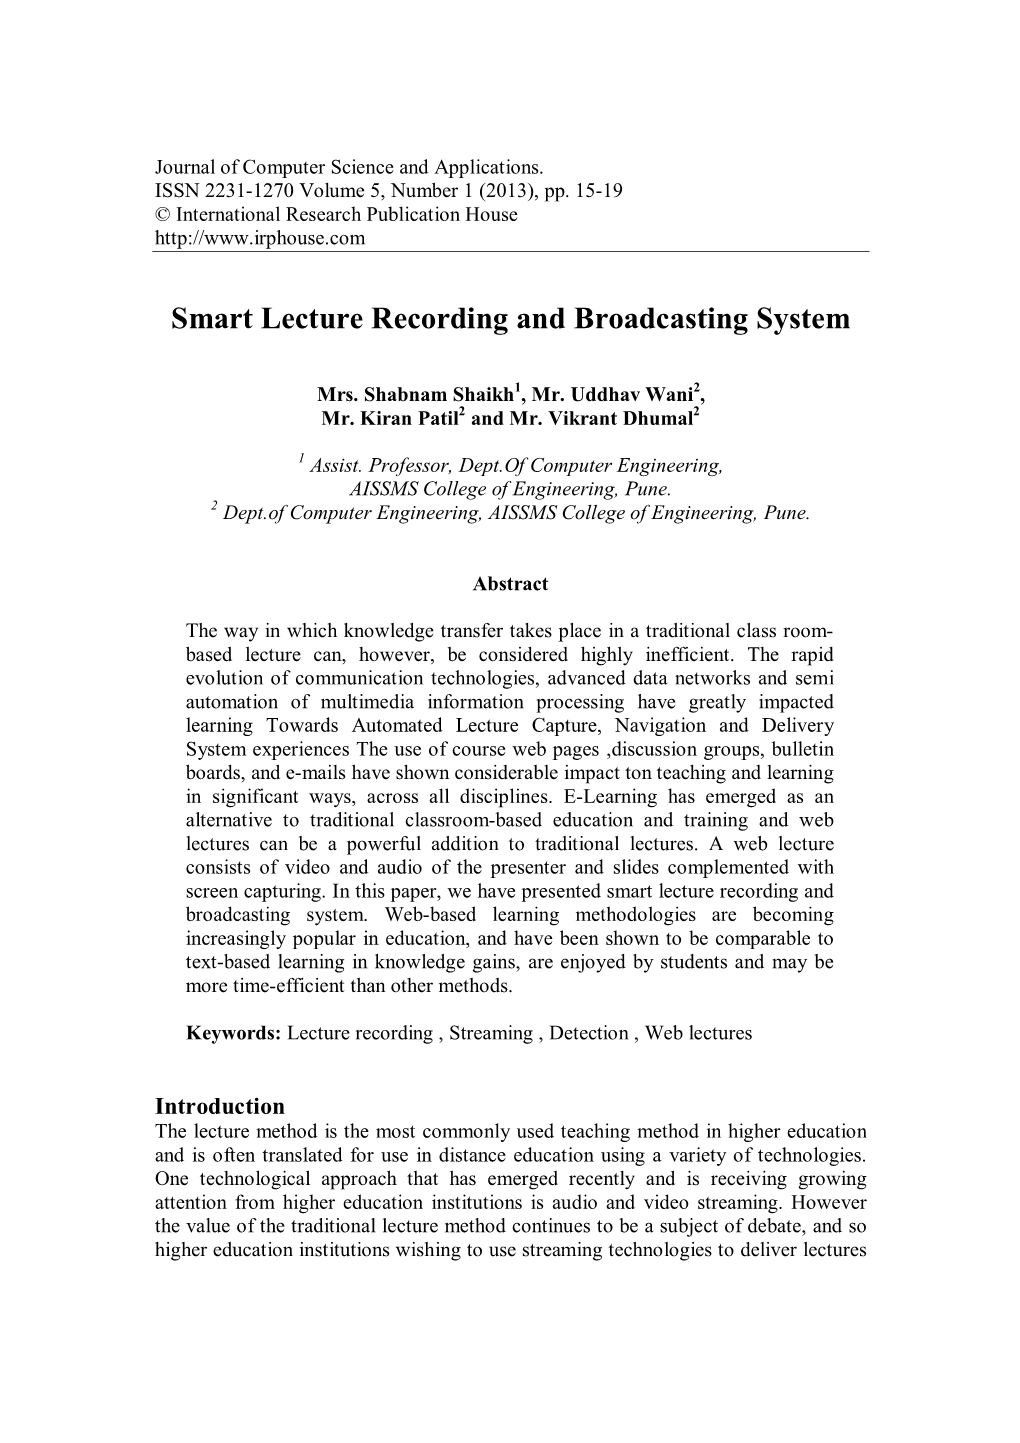 Smart Lecture Recording and Broadcasting System